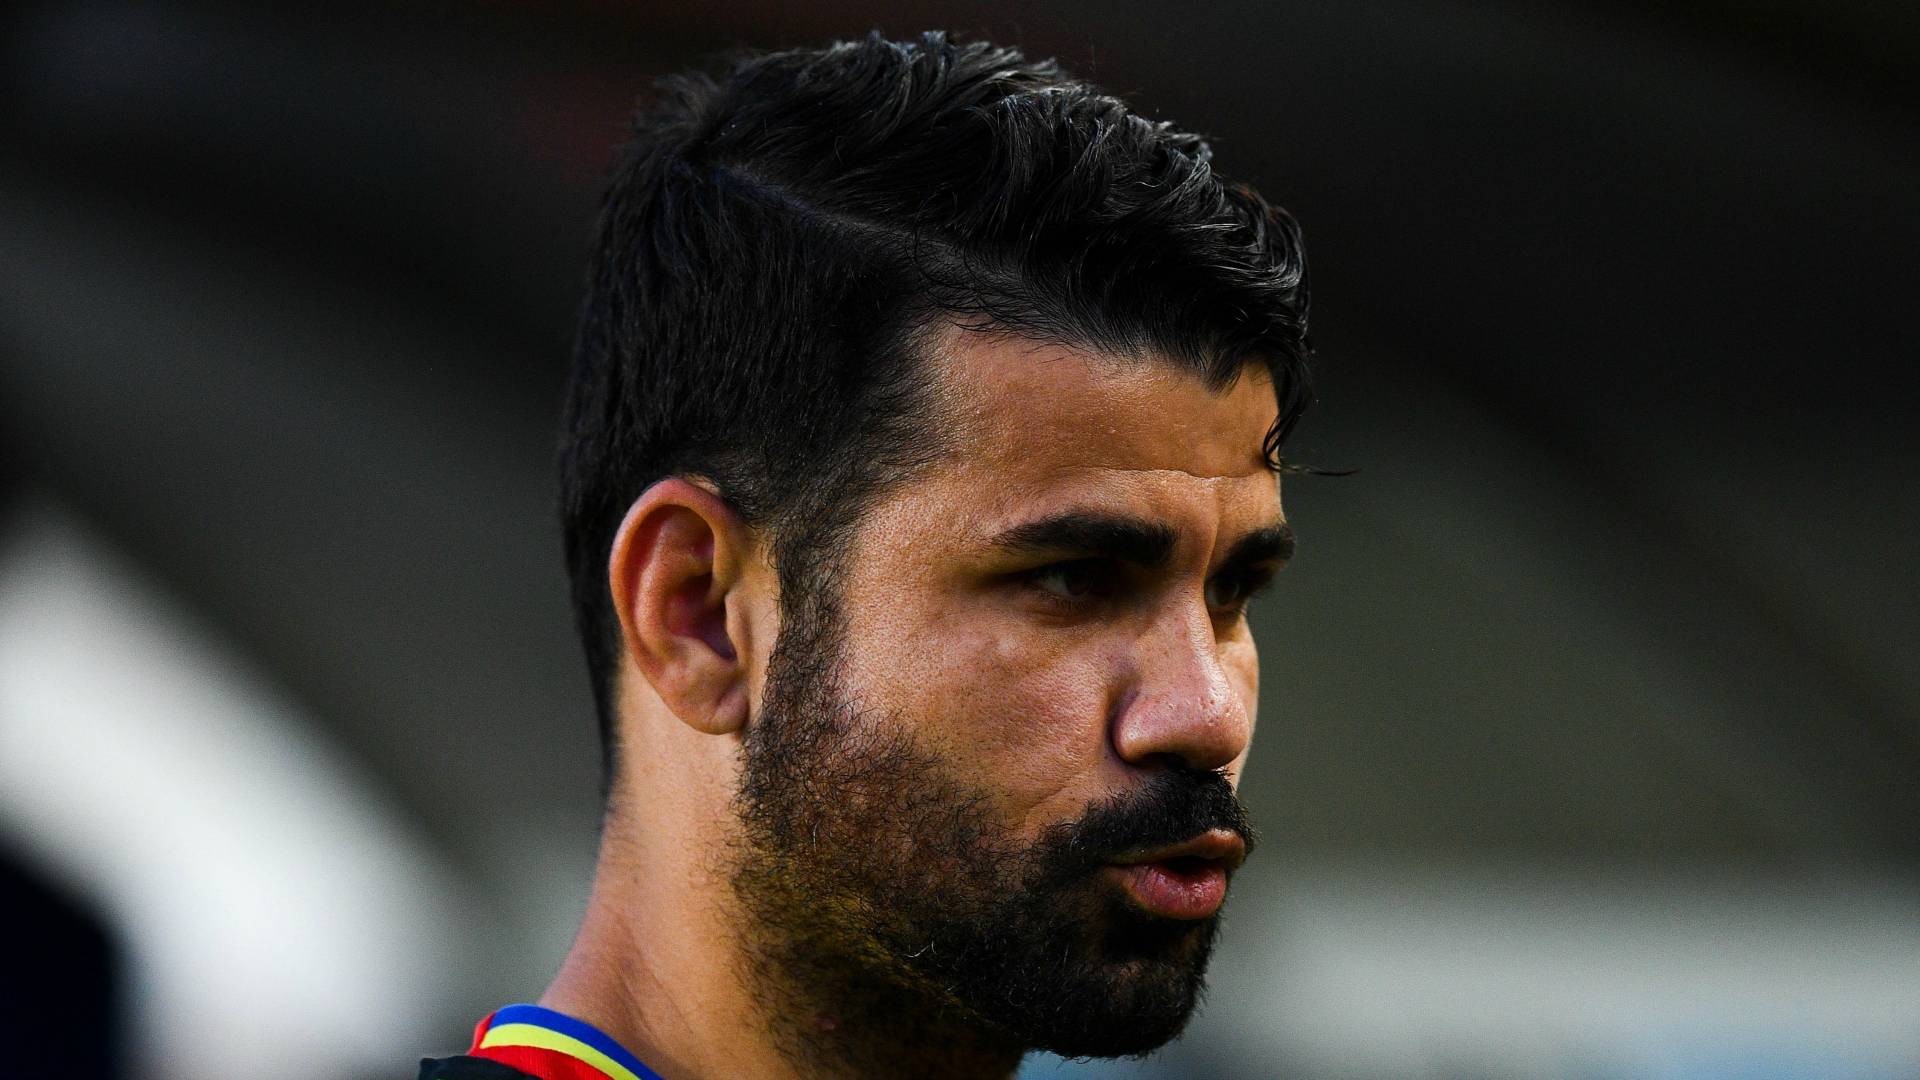 Costa threatened legal action against Chelsea